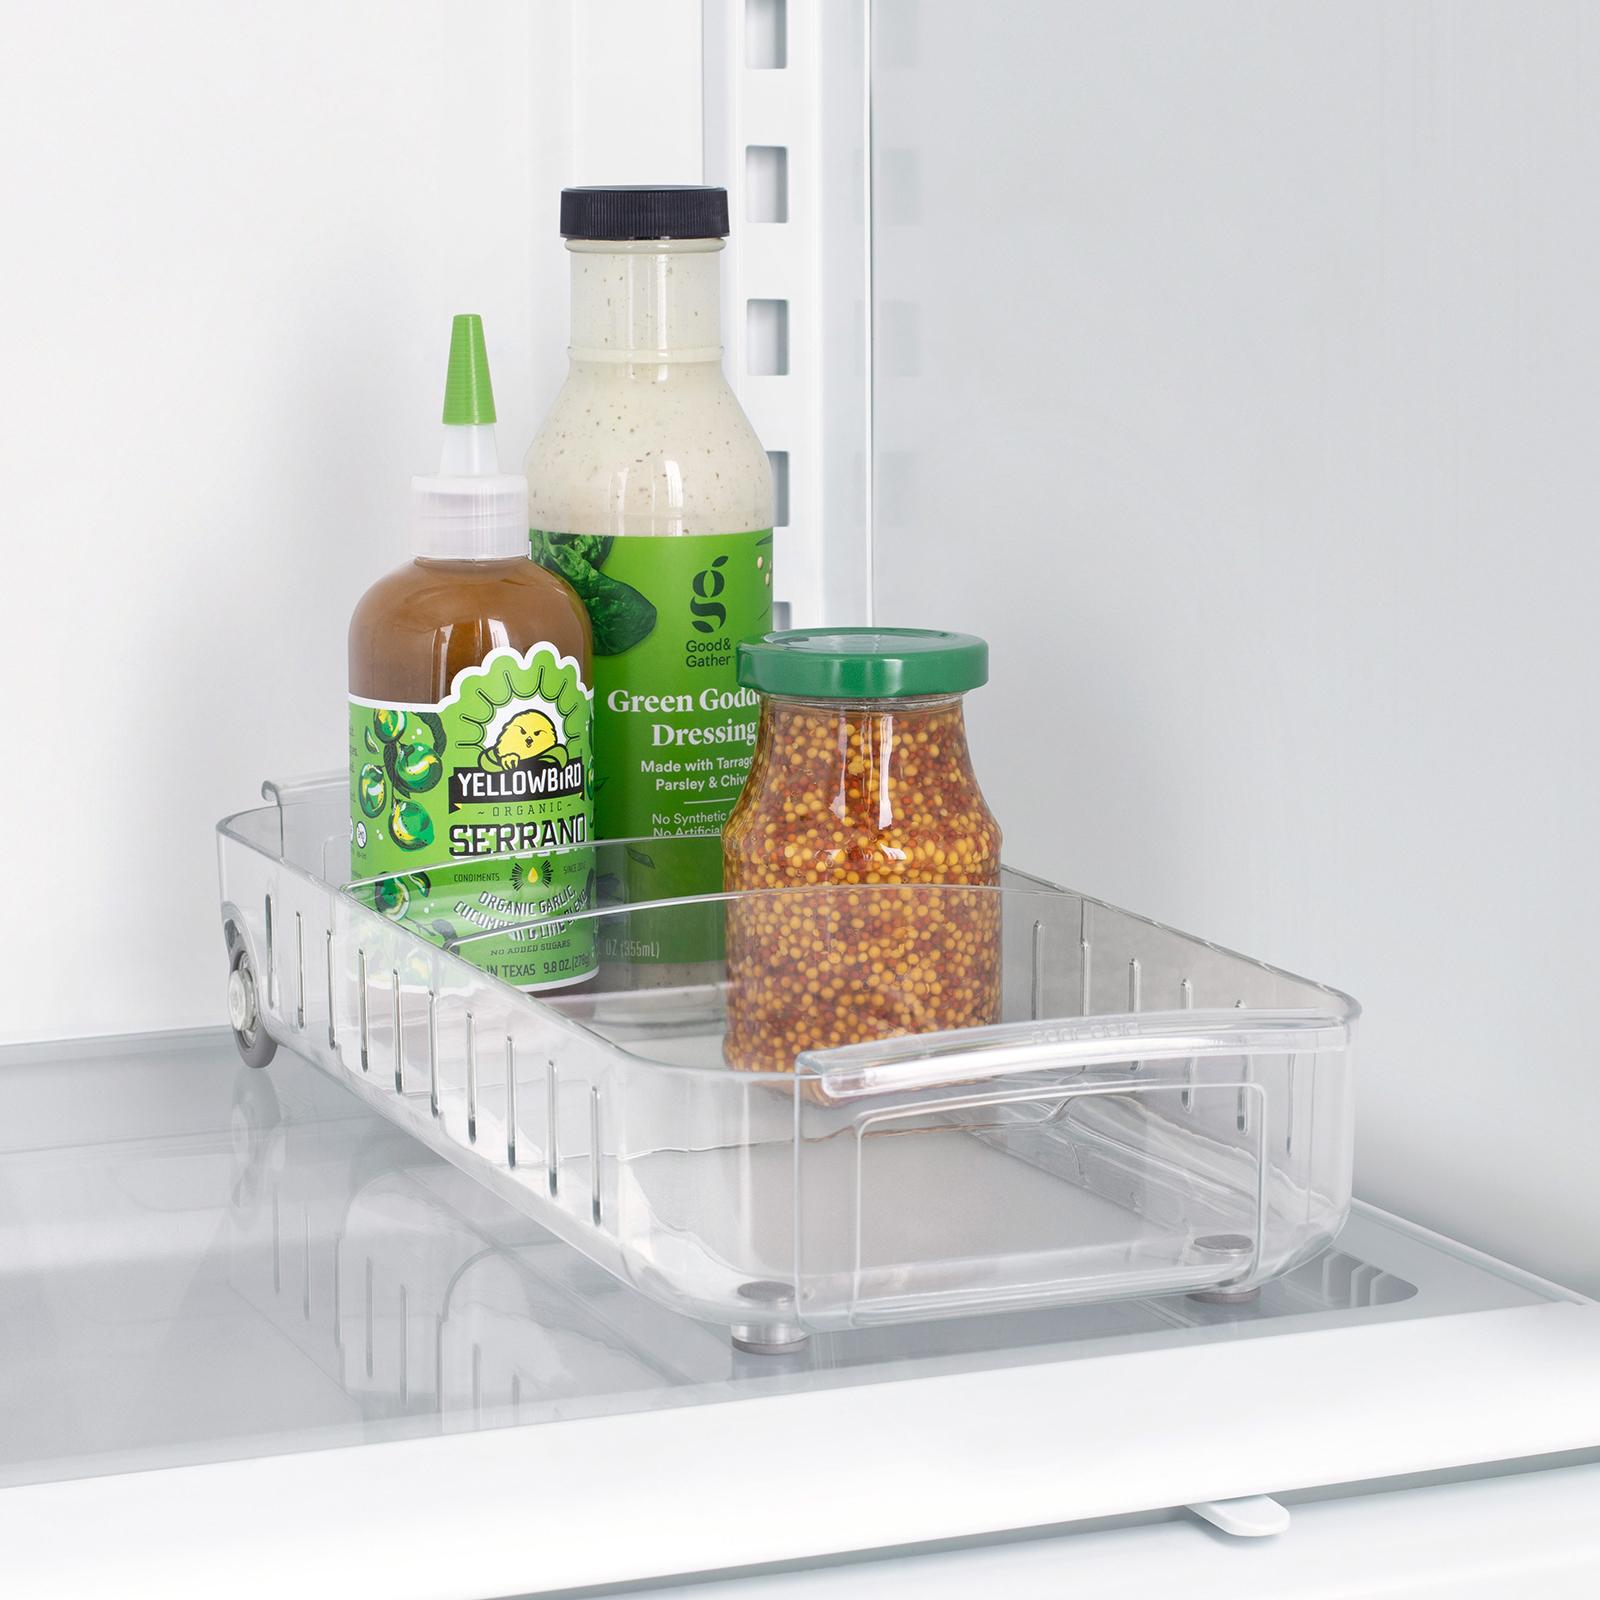 YouCopia RollOut Fridge Caddy BPA-Free Clear Rolling Refrigerator Organizer  Bin with Adjustable Dividers and Handles, 9 Wide